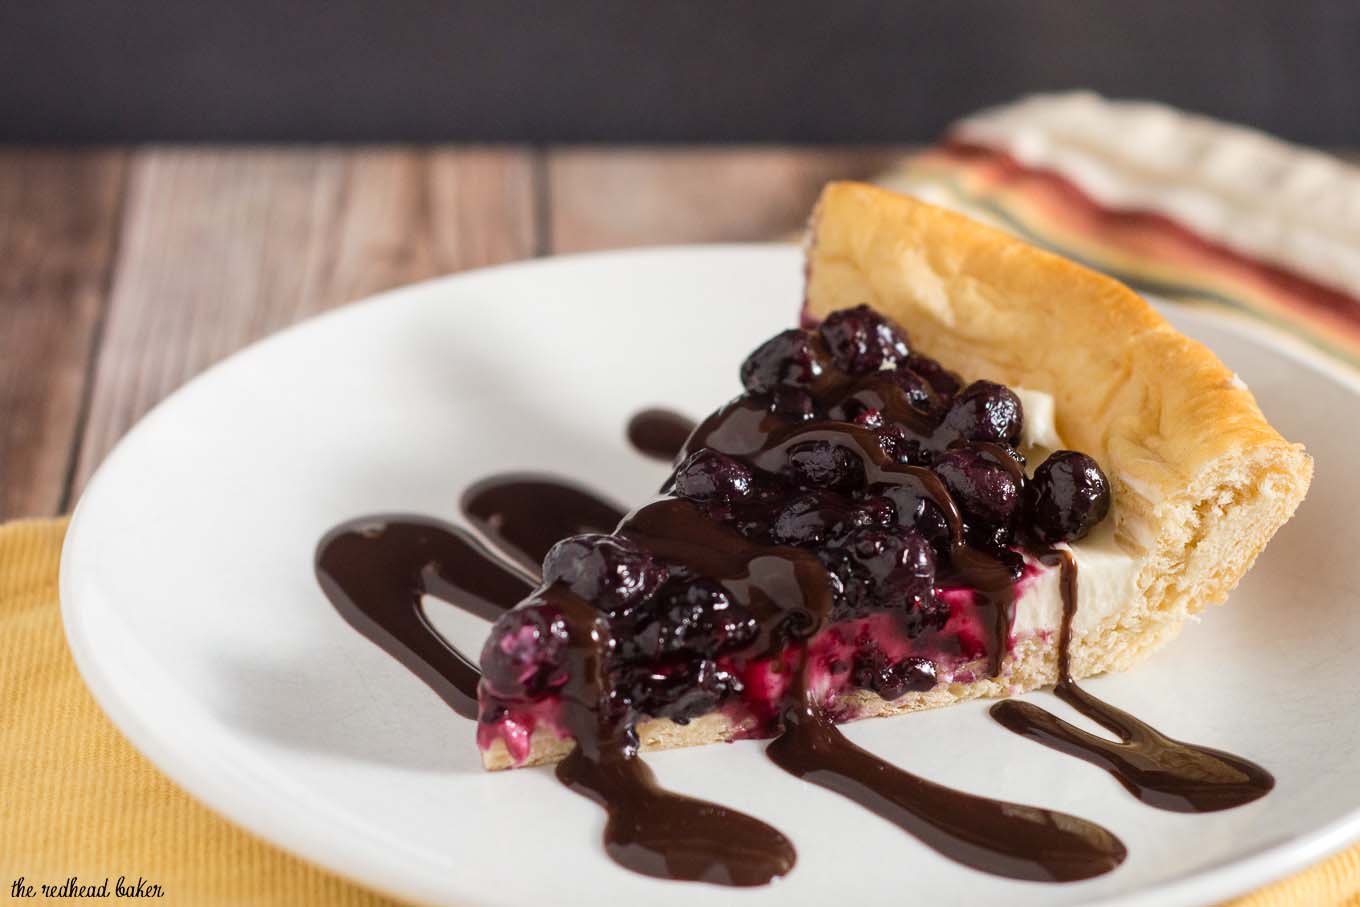 Pizza for dessert? You bet! Cheesecake Pizza has crescent dough as the crust, topped with sweetened cream cheese, berry compote and chocolate sauce. #SundaySupper